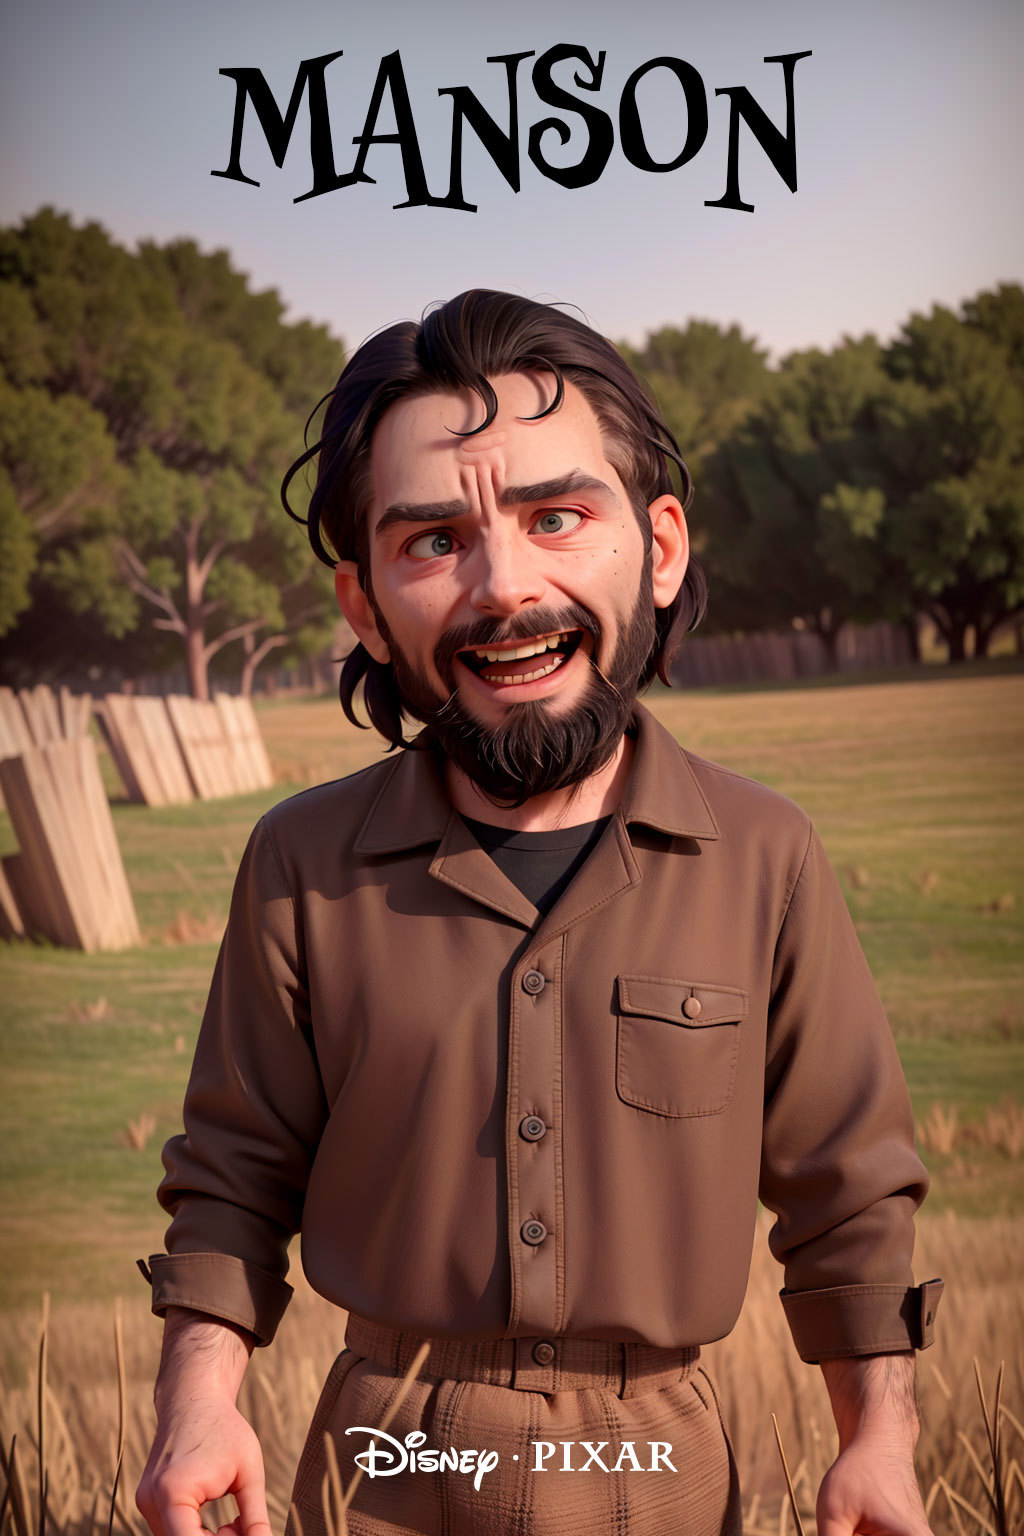 A 3D animated character of a man laughing, wearing a brown shirt and a beard.